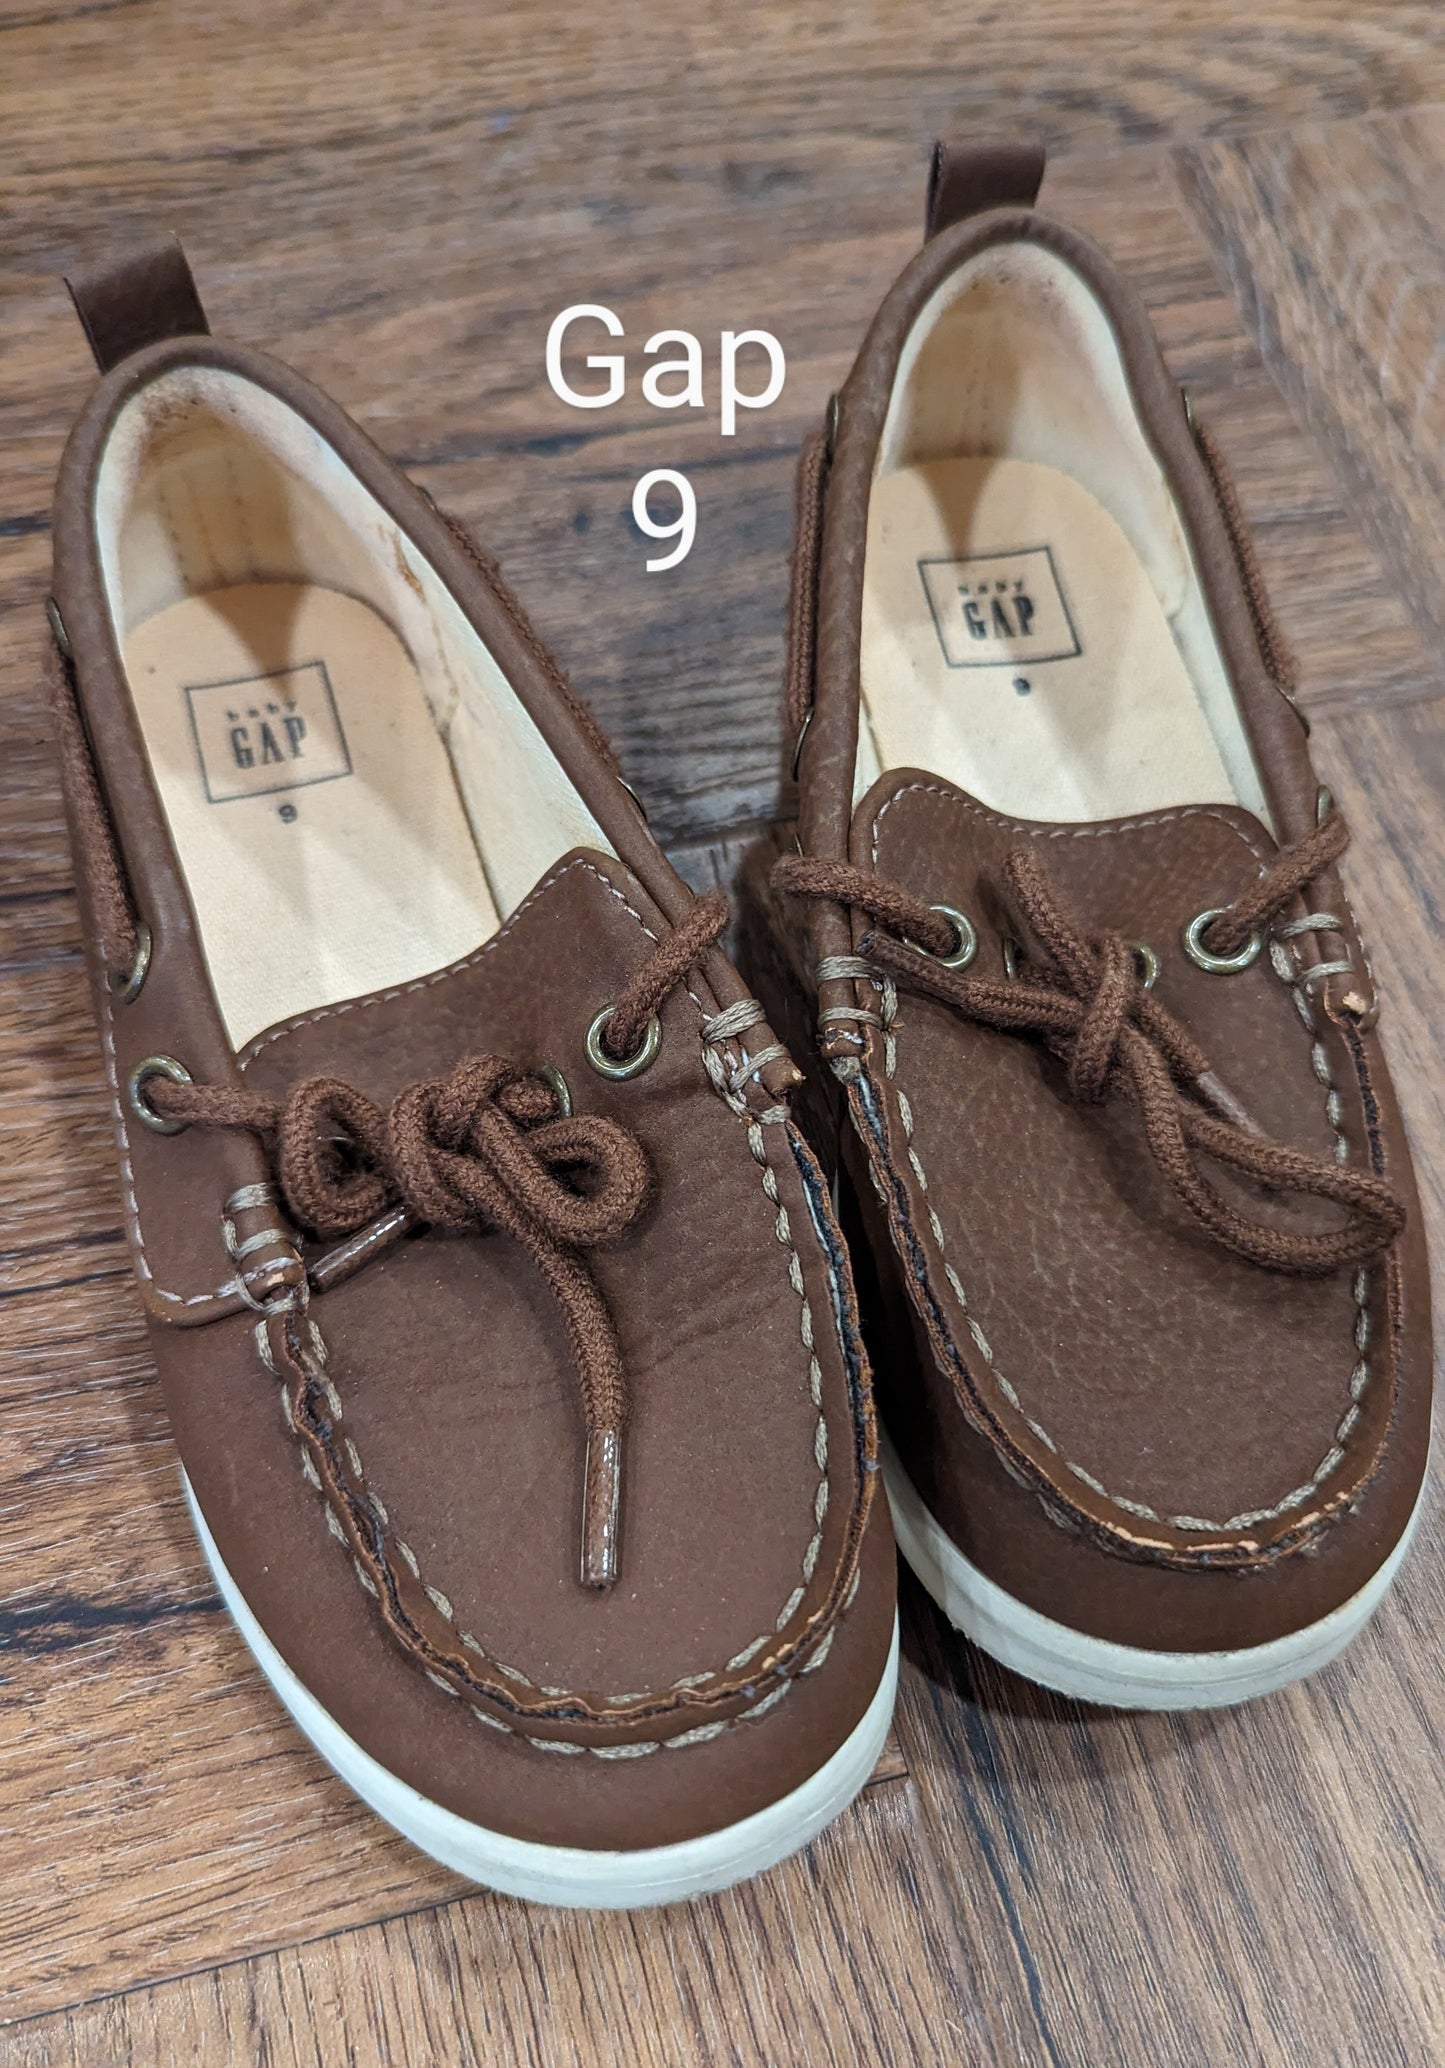 Gap brown loafers, 9, like new